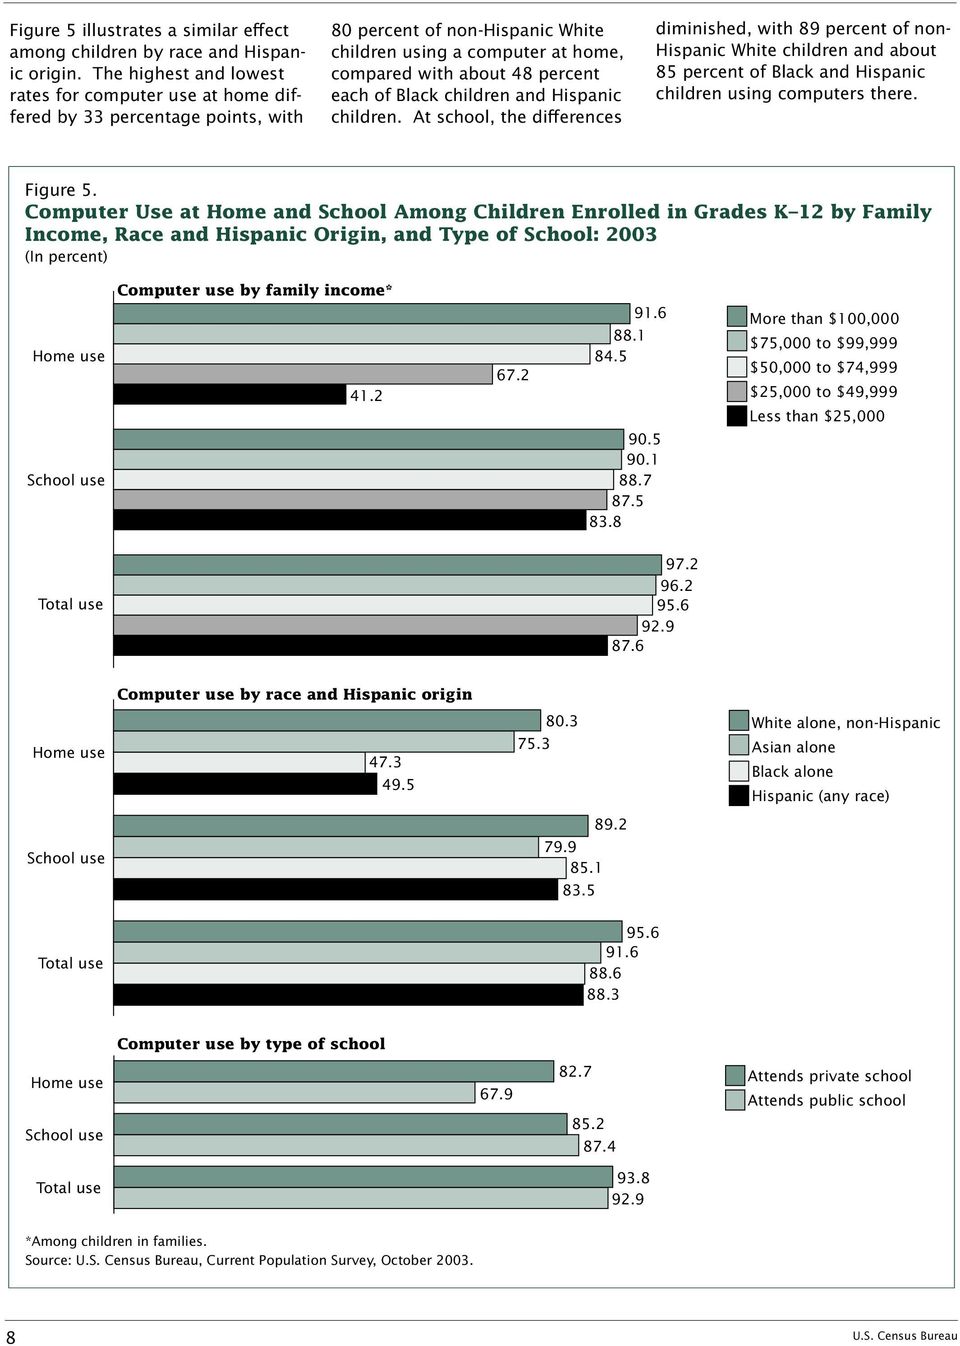 Black children and Hispanic children. At school, the differences diminished, with 89 percent of non- Hispanic White children and about 85 percent of Black and Hispanic children using computers there.